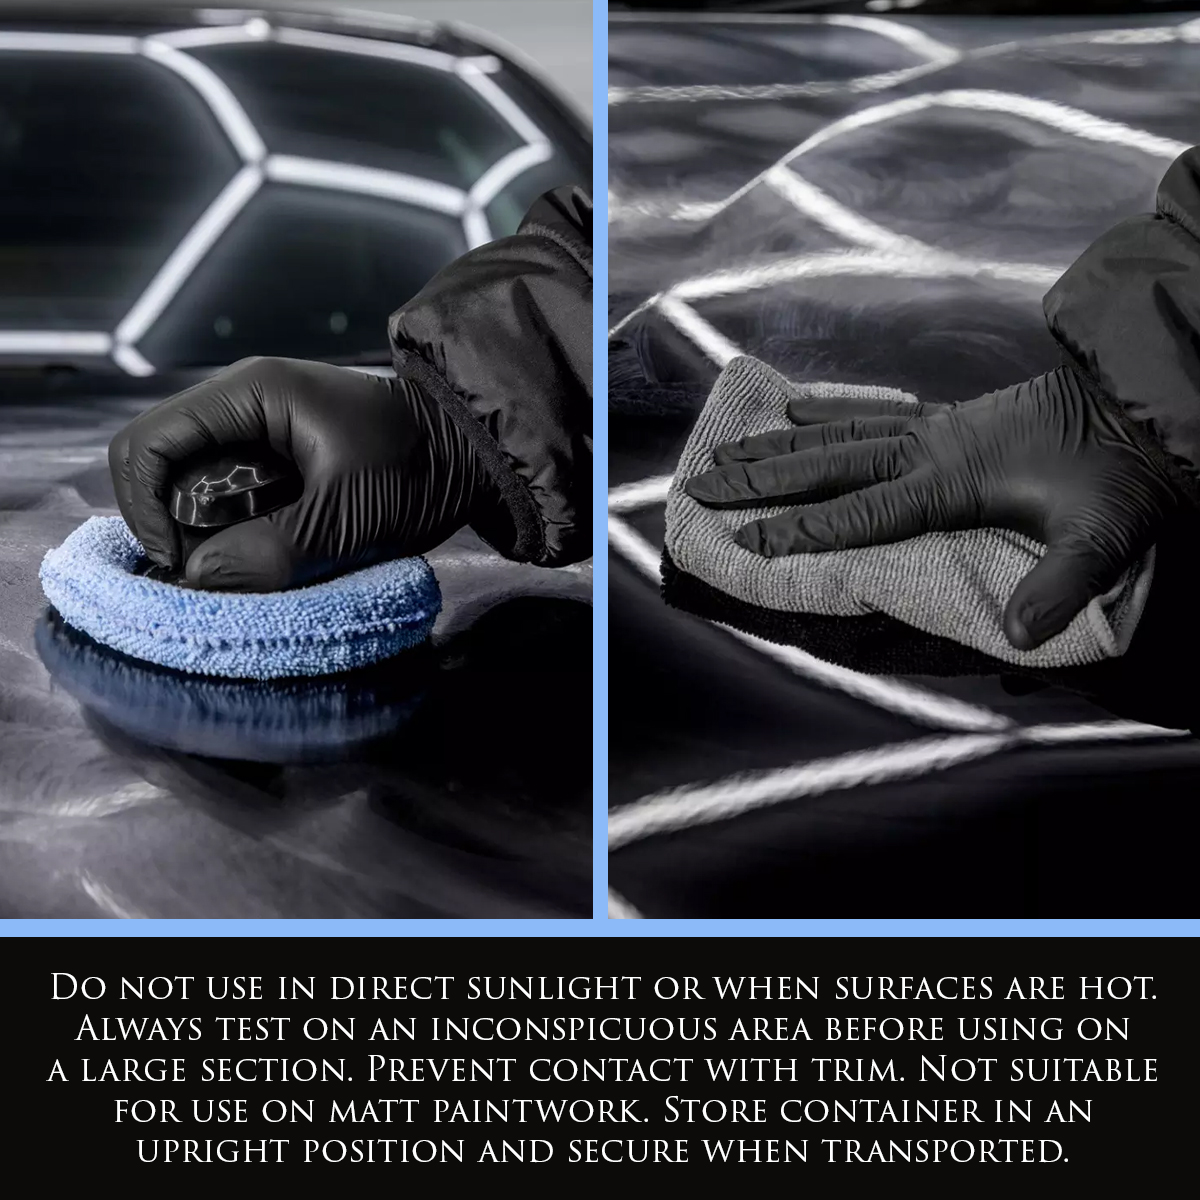 Left Image shows Diamond Carnauba Wax being applied to a vehicle with a blue microfibre sponge applicator. Right Image shows Diamond Carnauba Wax being buffed off a black vehicle with a grey microfibre cloth. Text: Do not use in direct sunlight or when surfaces are hot. Always test on an inconspicuous area before using on a large section. Prevent contact with trim. Not suitable for use on matt paintwork. Store container in an upright position and secure when transported.